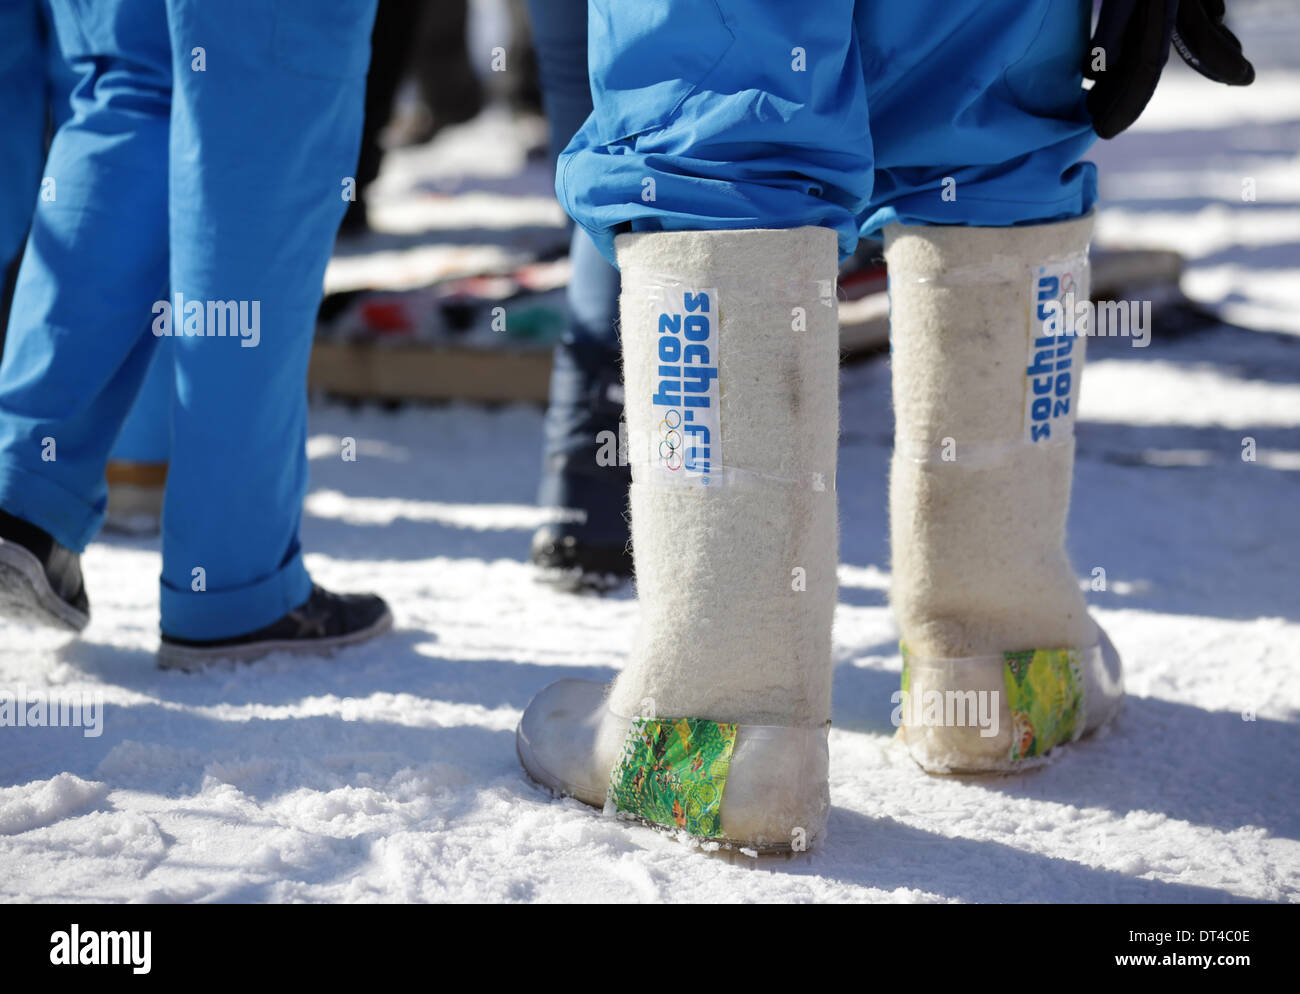 Boots with the Olympic logo are seen during the Olympic rings during the Ladies' Cross Country Skiathlon 7.5 km Classic   7.5 km Free in Laura Cross-country Ski & Biathlon Center at the Sochi 2014 Olympic Games, Krasnaya Polyana, Russia, 08 February 2014. Photo: Kay Nietfeld/dpa Stock Photo